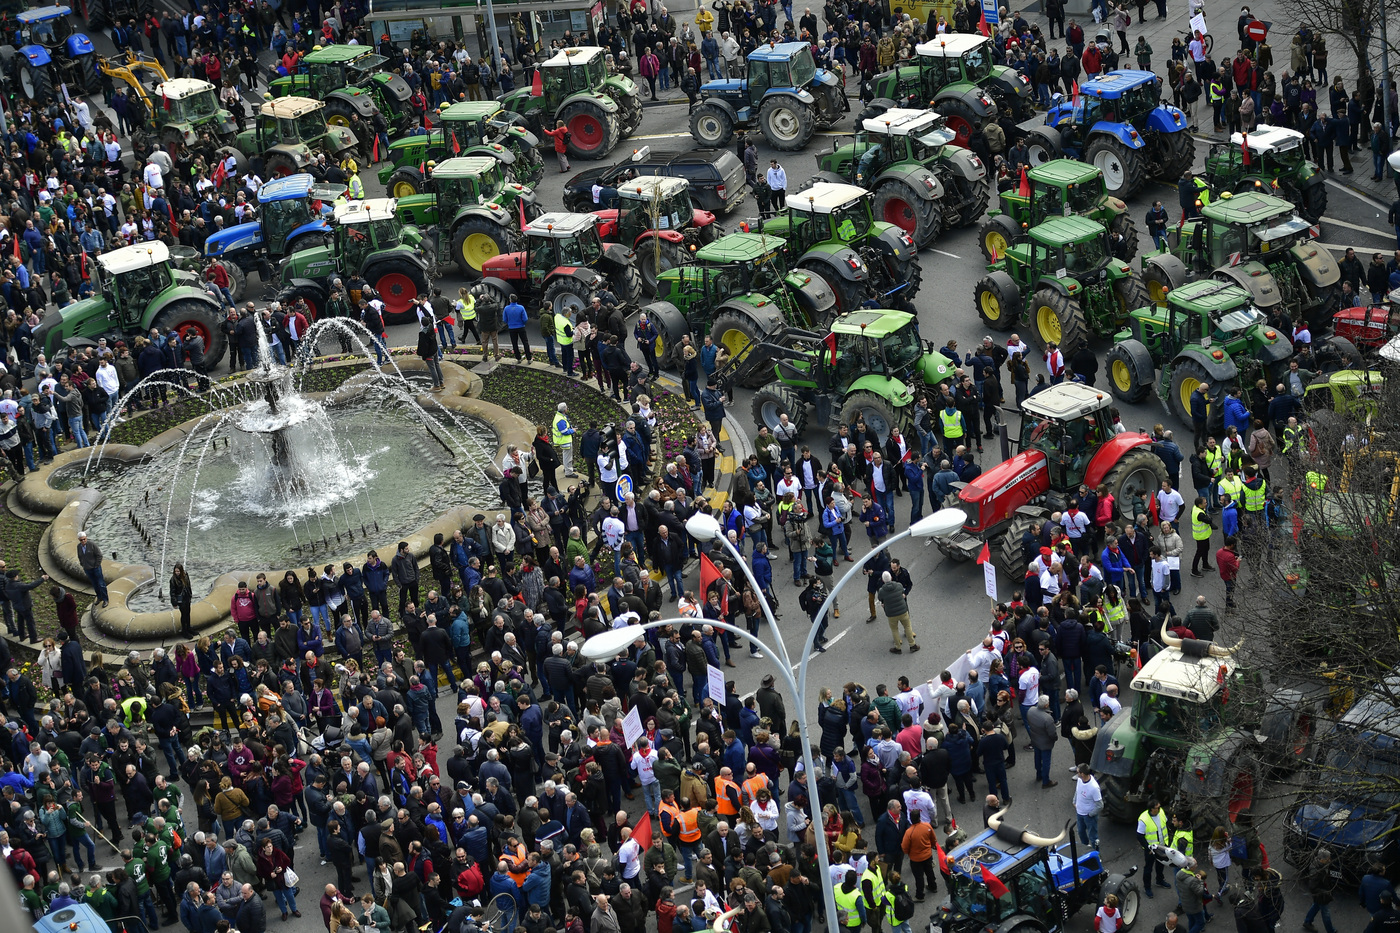 Farmers block the center of the city with their tractors during a protest in Pamplona, northern Spain, Wednesday, Feb. 19, 2020. Farmers across Spain are taking part in mass protests over what they say are plummeting incomes for agricultural workers. (AP Photo/Alvaro Barrientos)